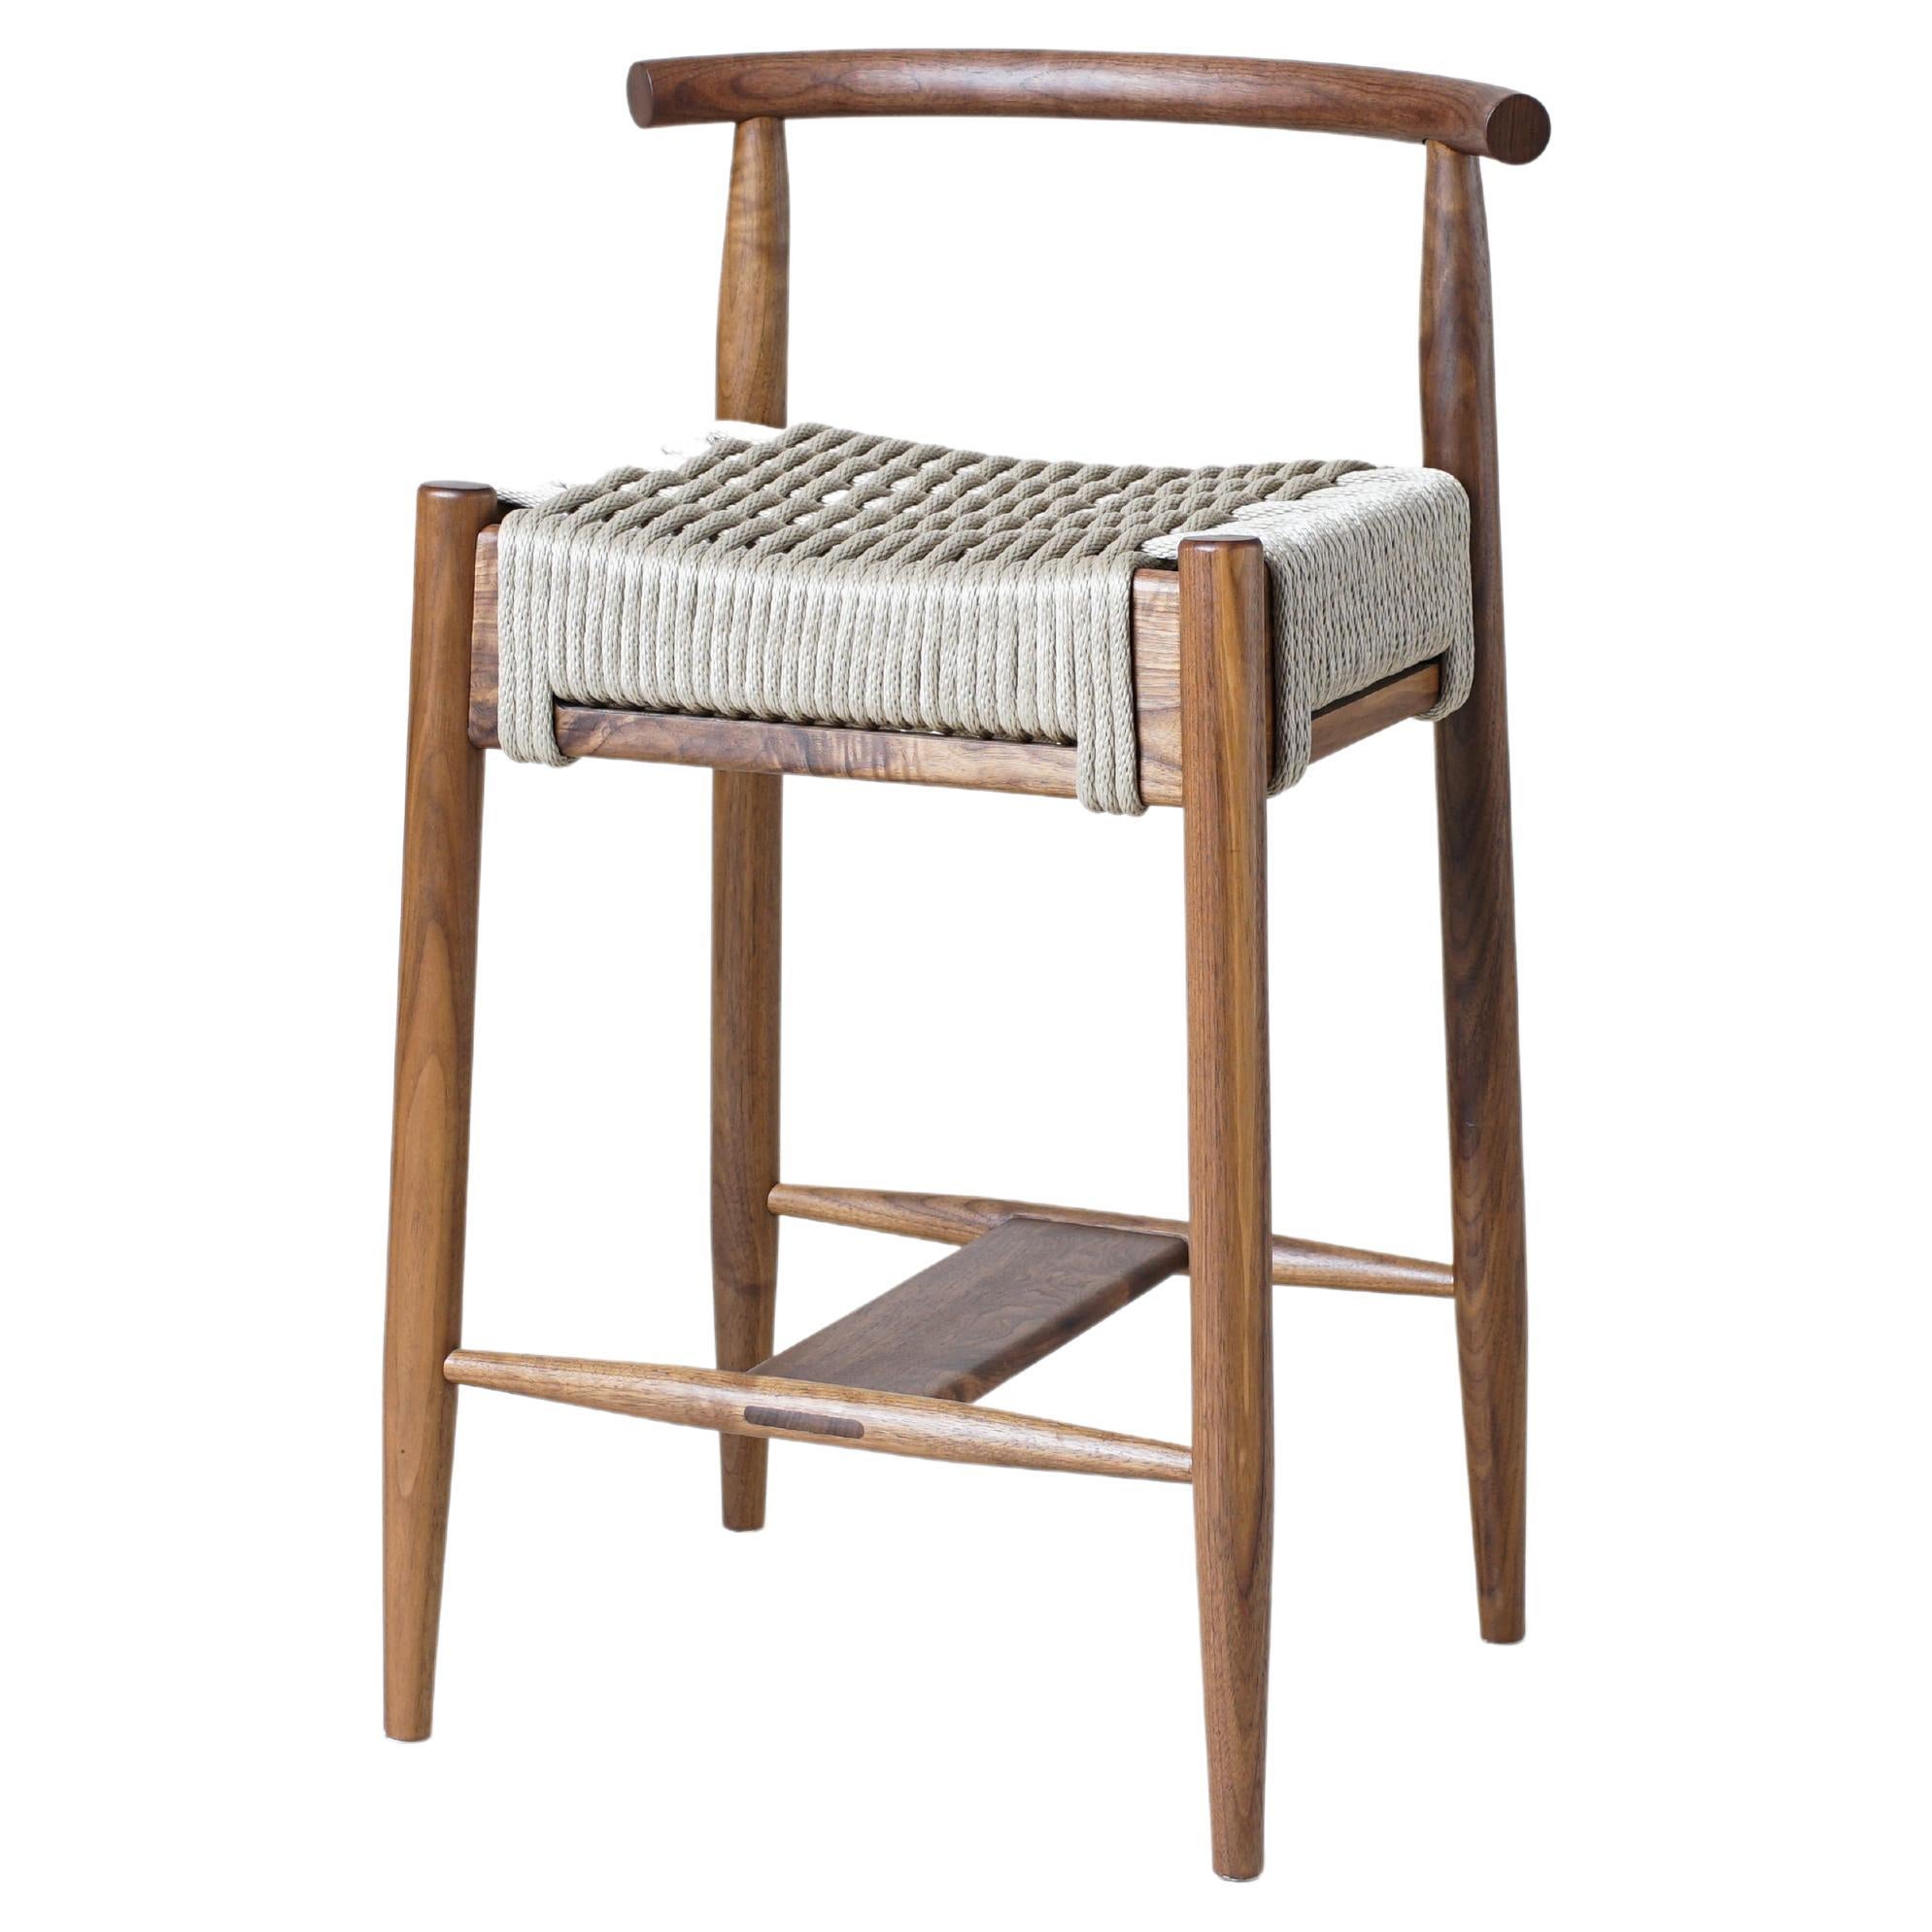 Phloem Studio Harbor Counter Stool is a modern contemporary solid wood stool handmade custom to order. The Harbor Stool is available in counter or bar heights, with turned, tapered, and shaped legs and solid wood backrest. Available in 4 solid wood